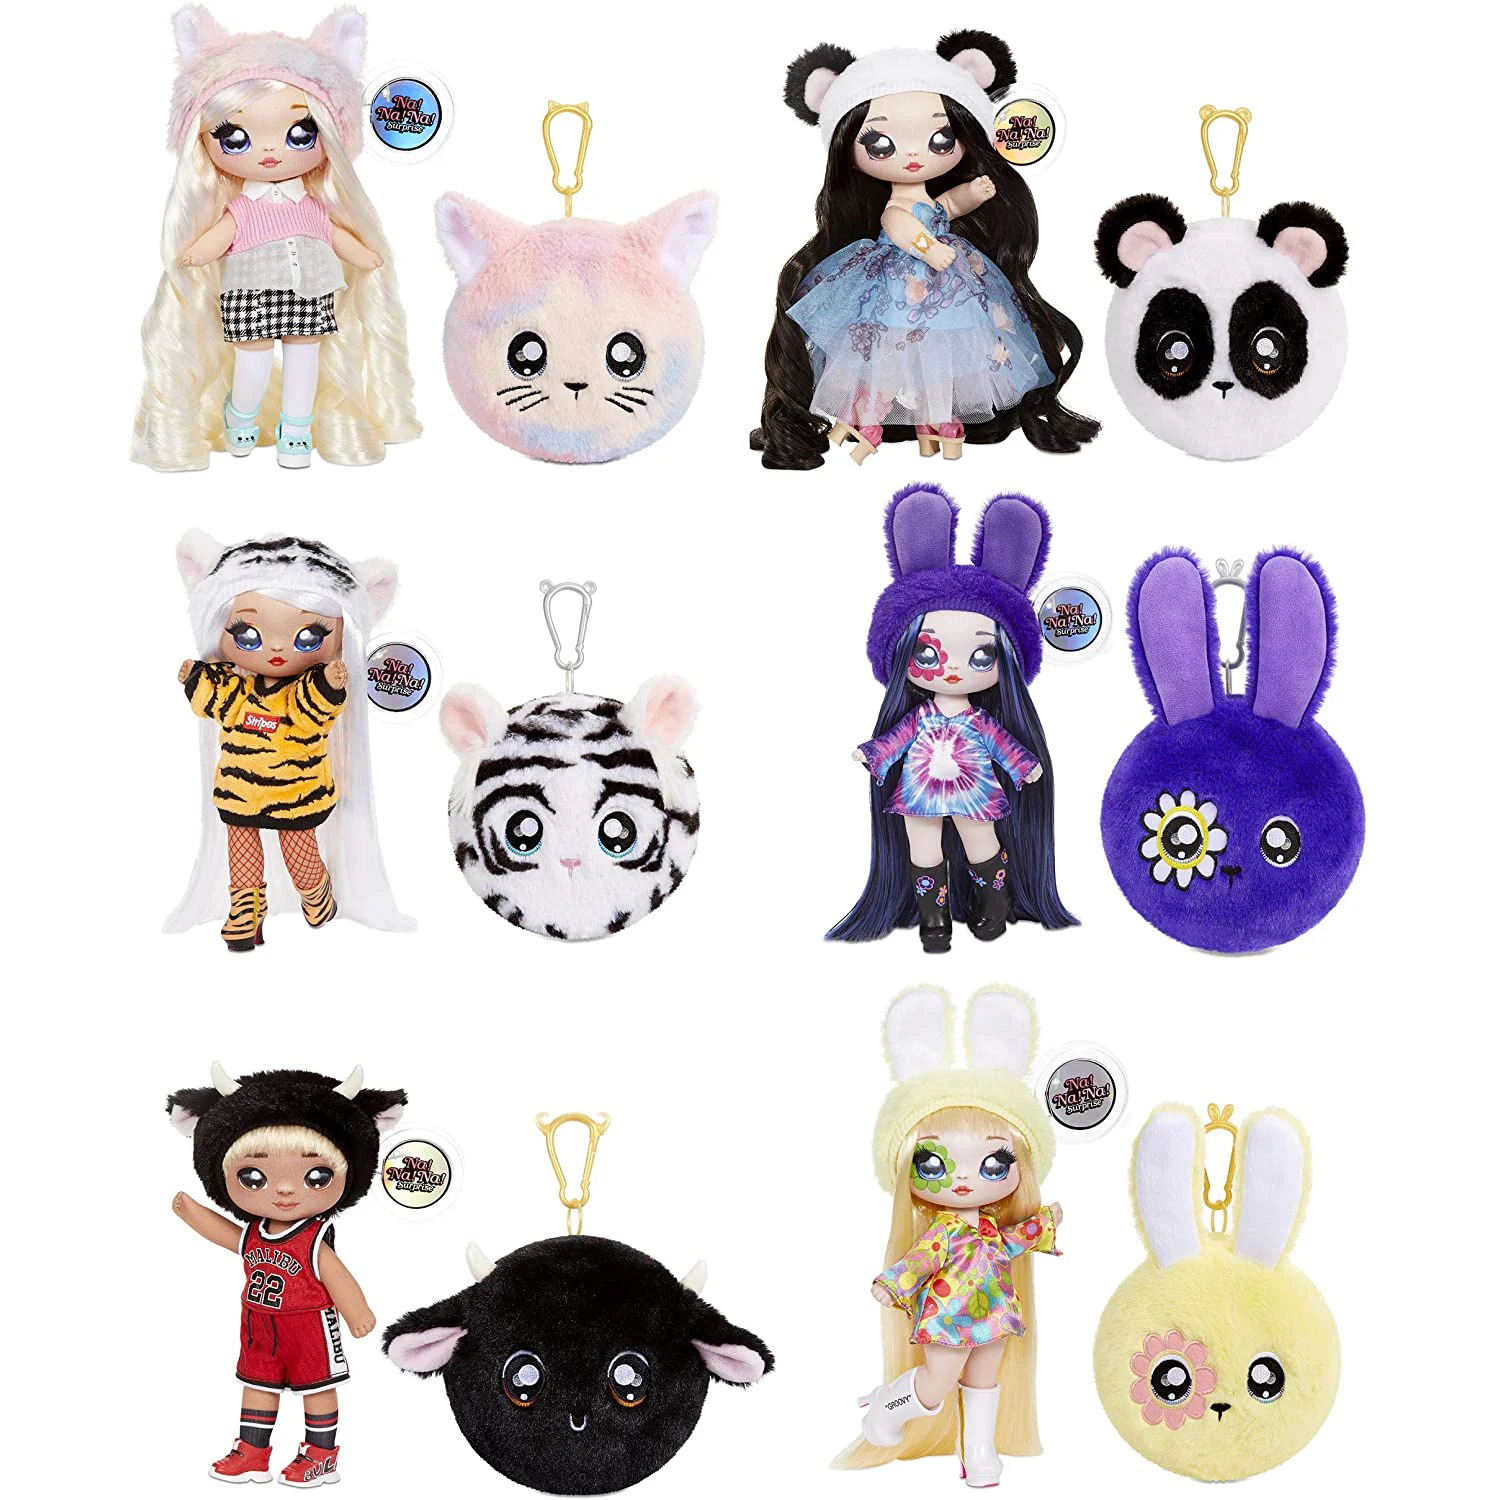 

6/PCS Lol Surprise Dolls MGA Entertainment Na! Na! Na! Surprise 2-In-1 Fashion Doll Plush Toys Cute Purse Series Suit Kids Toys